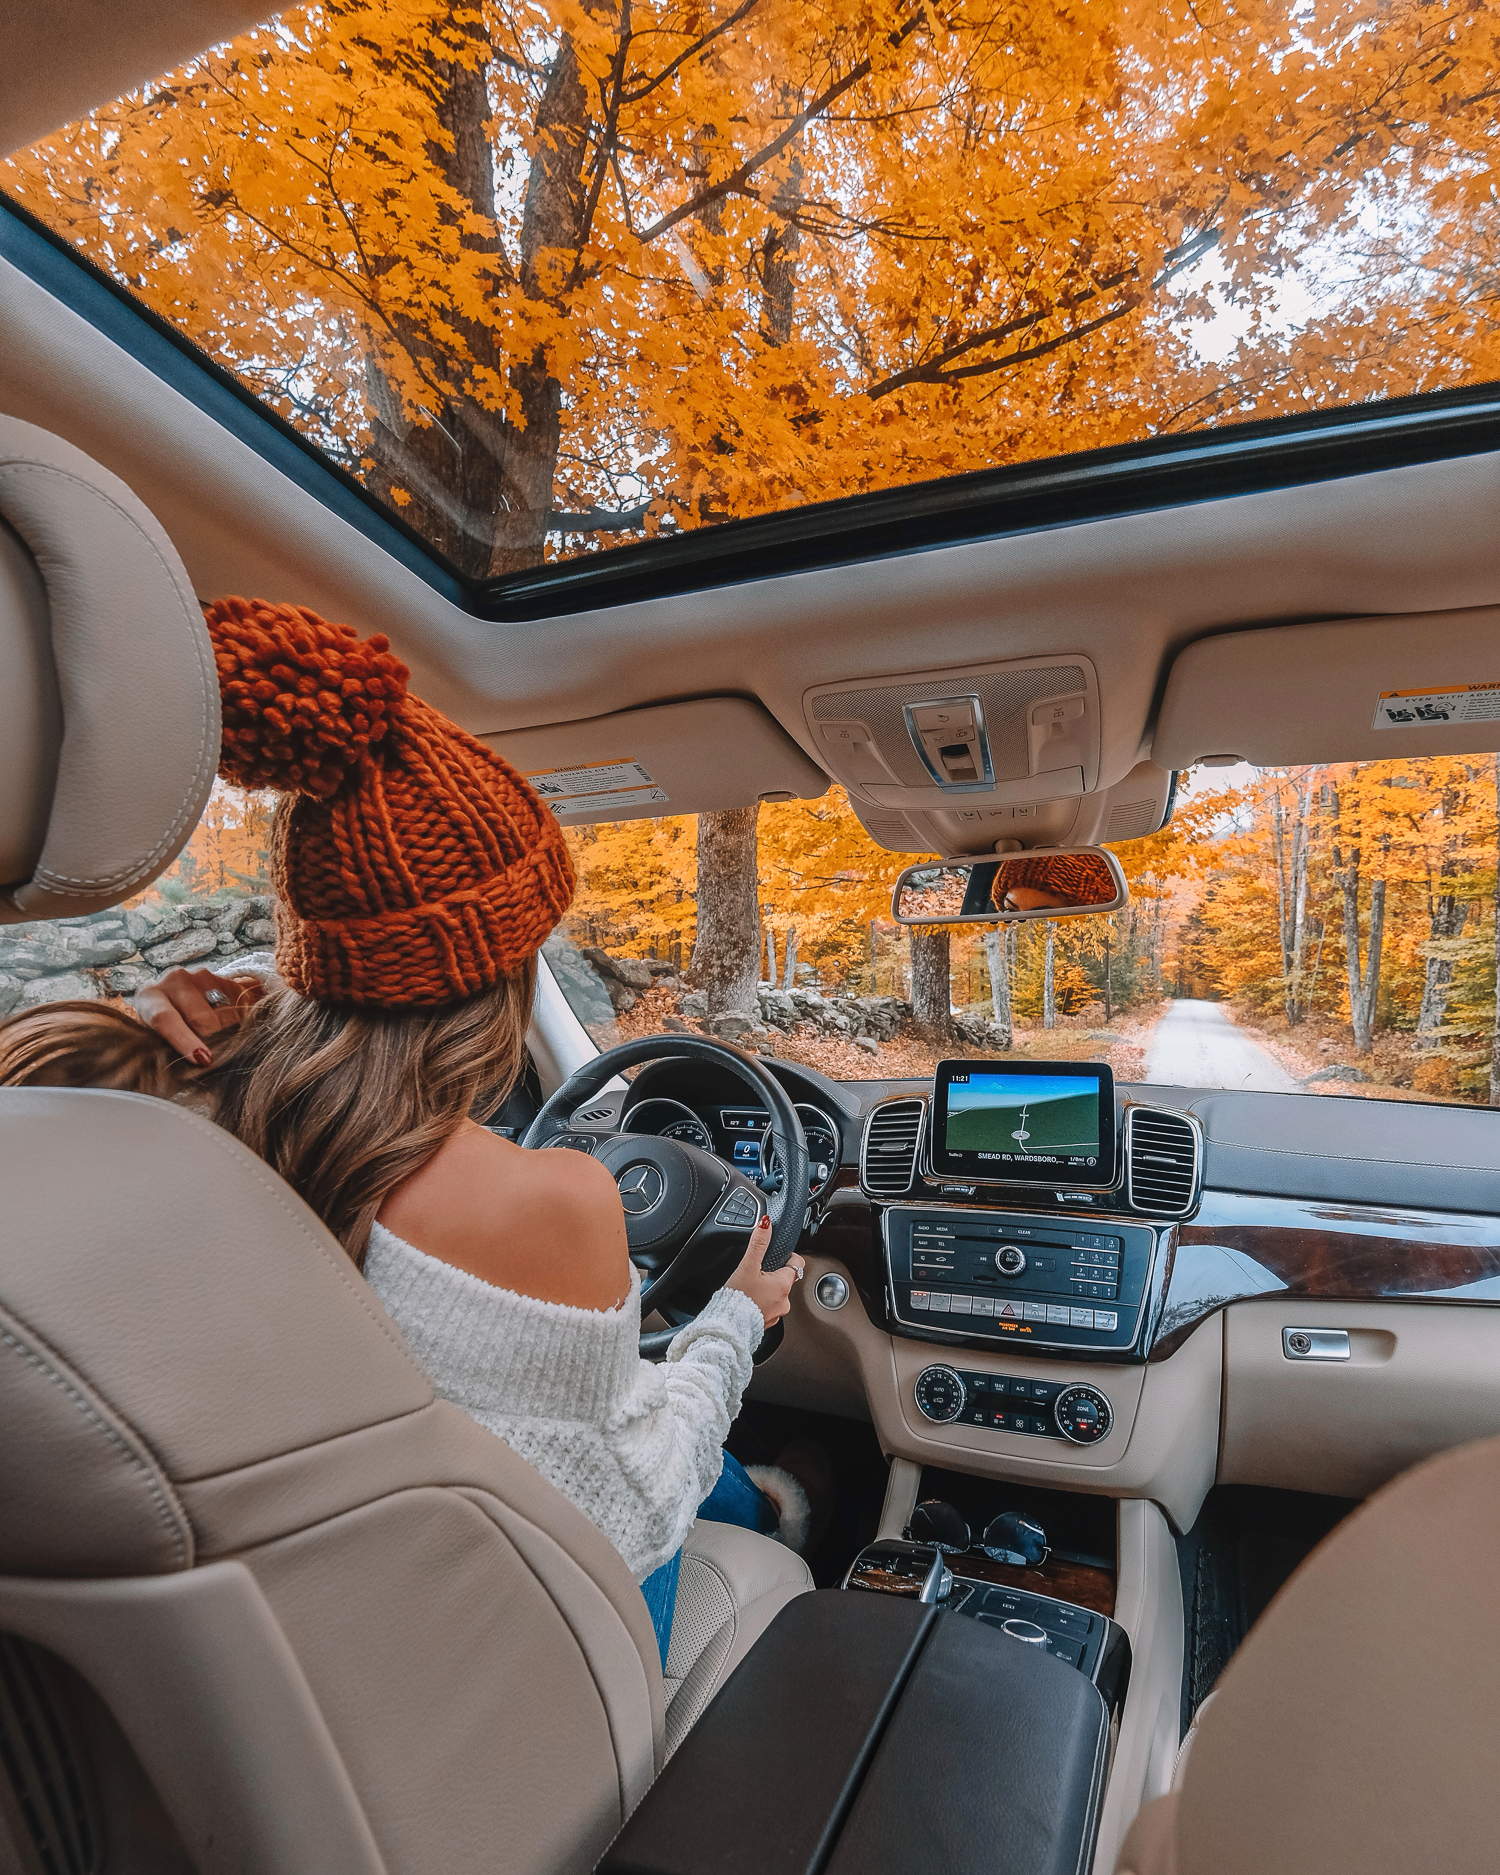 How to Plan a Fall Foliage Road Trip - Southern Curls & Pearls